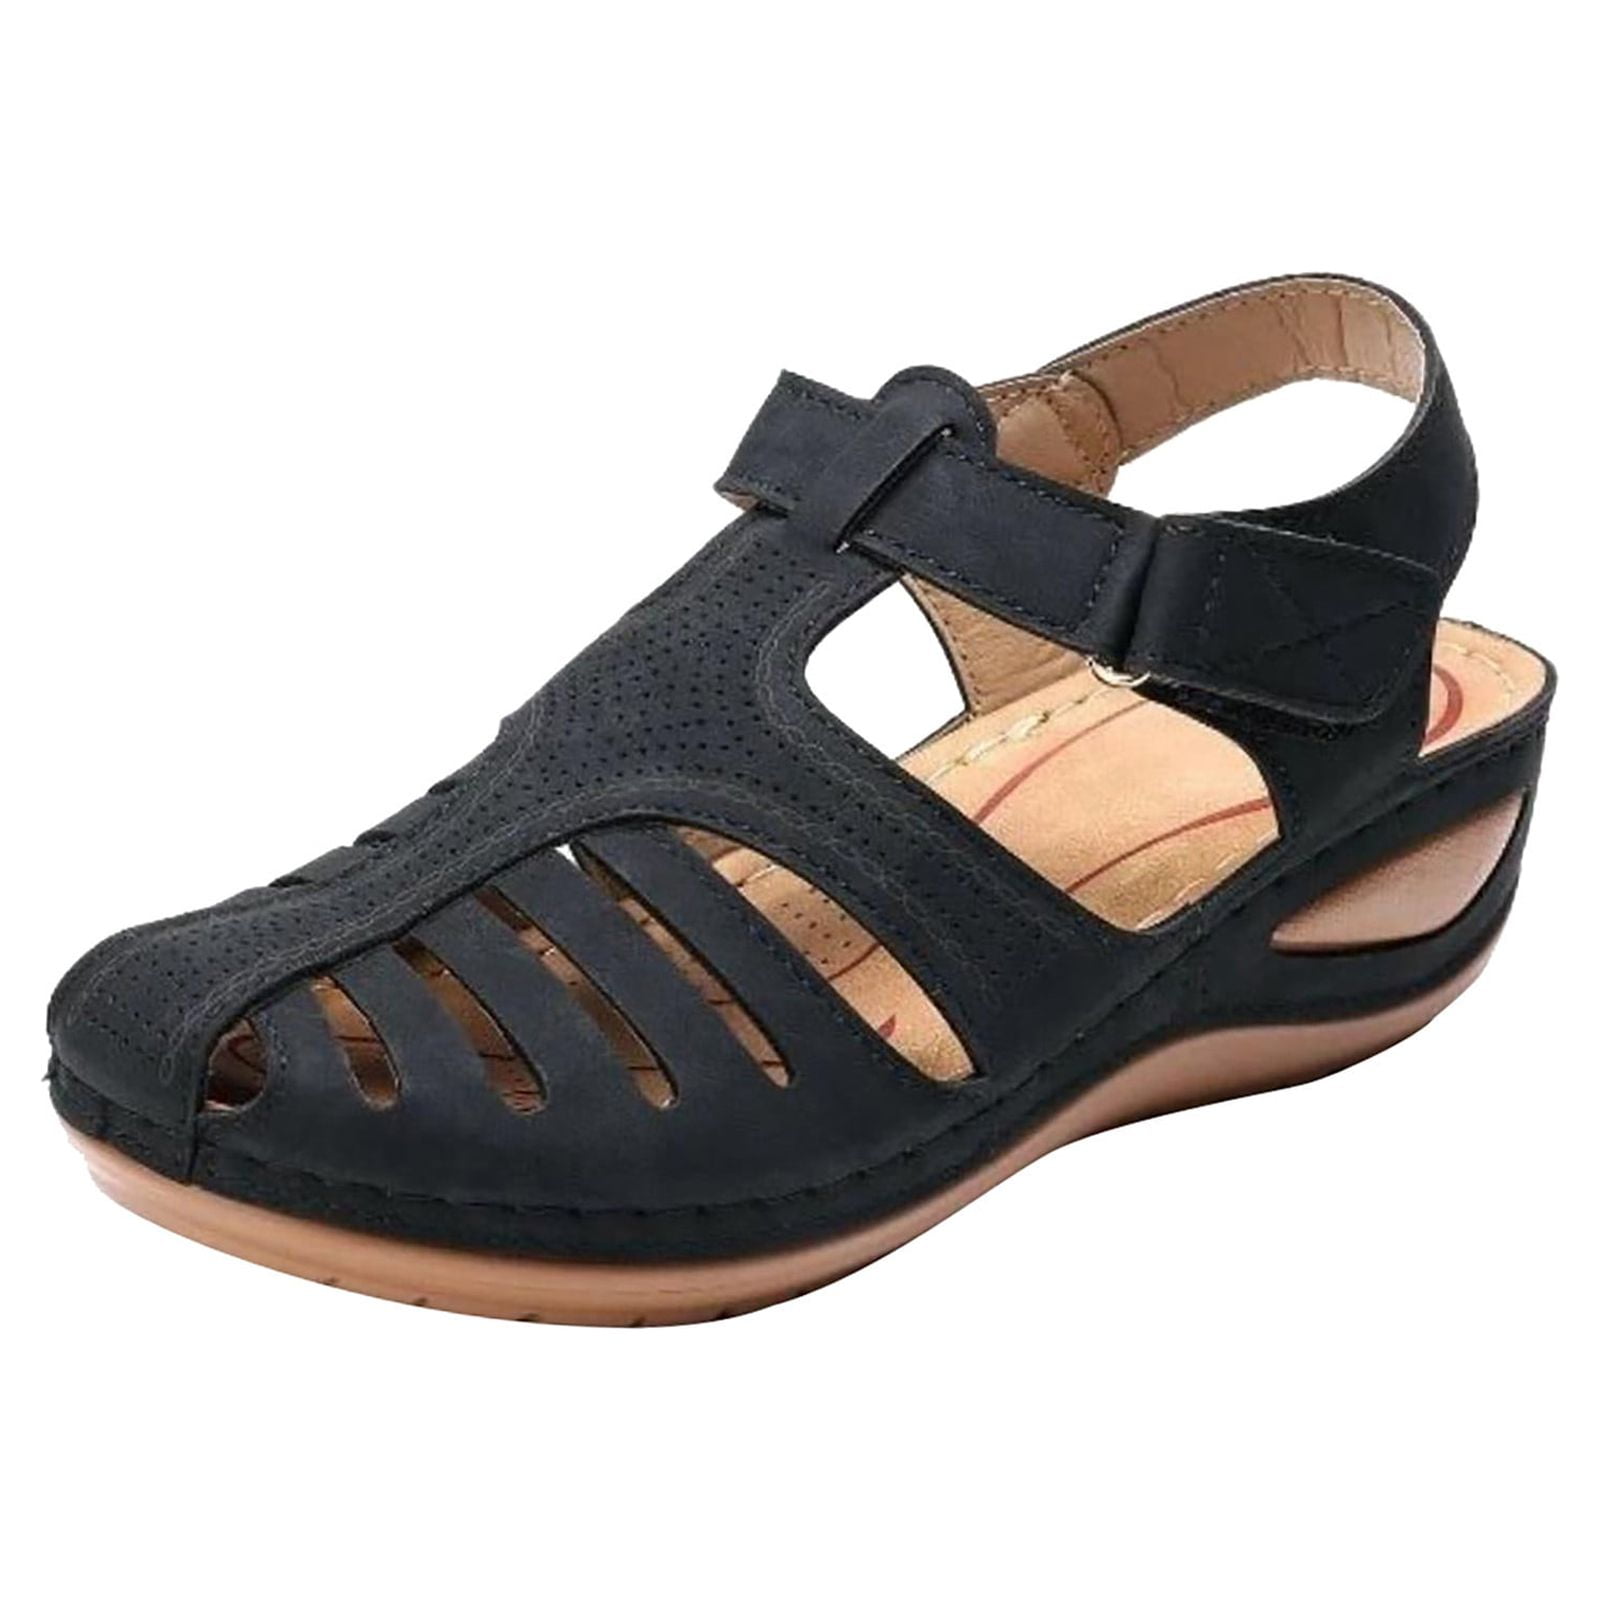 Sandals for Women Sandals Clearance Soft Leather Closed Toe Vintage ...